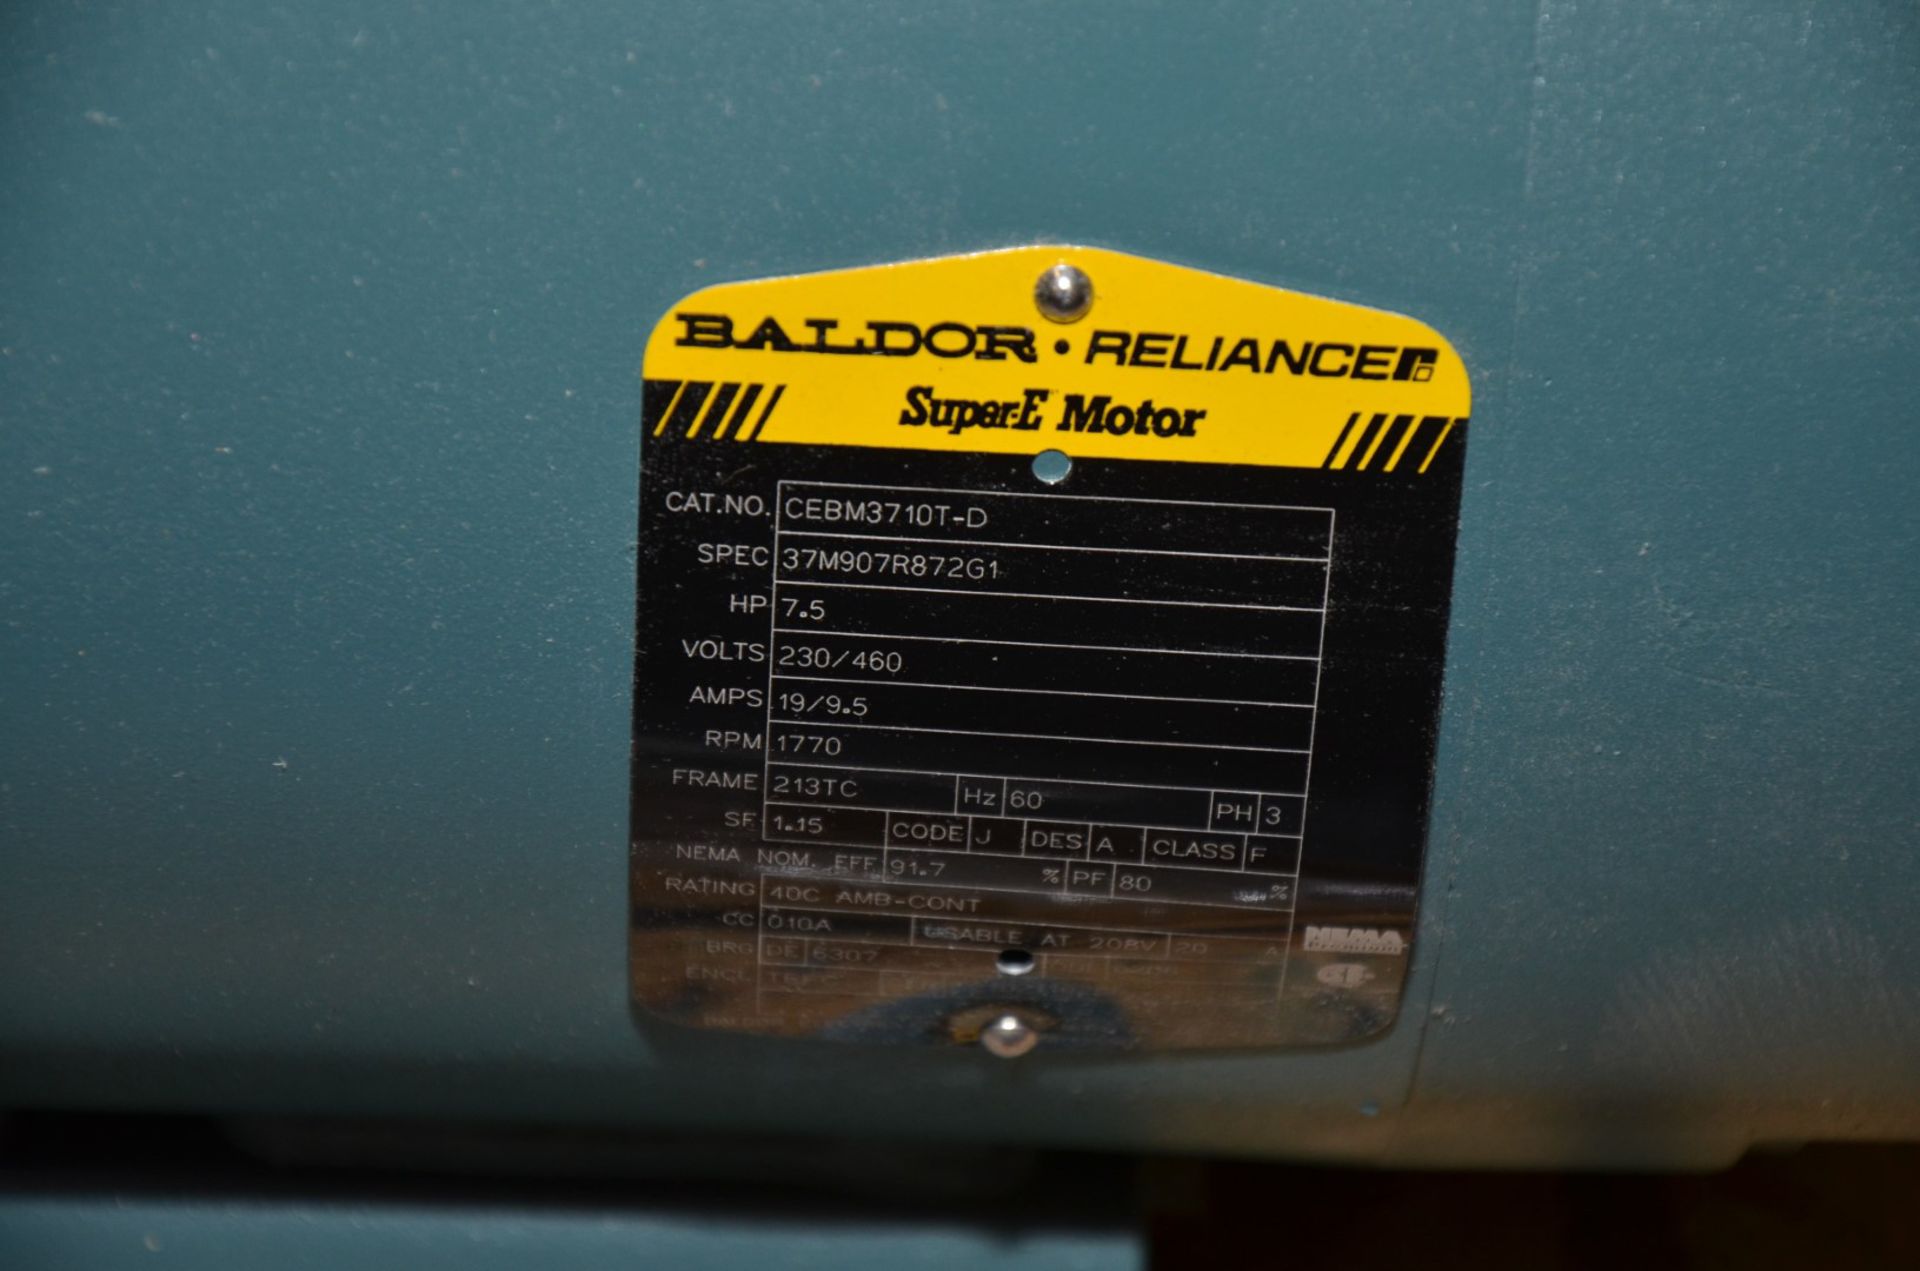 BALDOR 7.5 HP 1770 RPM ELECTRIC MOTOR [RIGGING FEE FOR LOT #1628 - $25 USD PLUS APPLICABLE TAXES] - Image 2 of 2